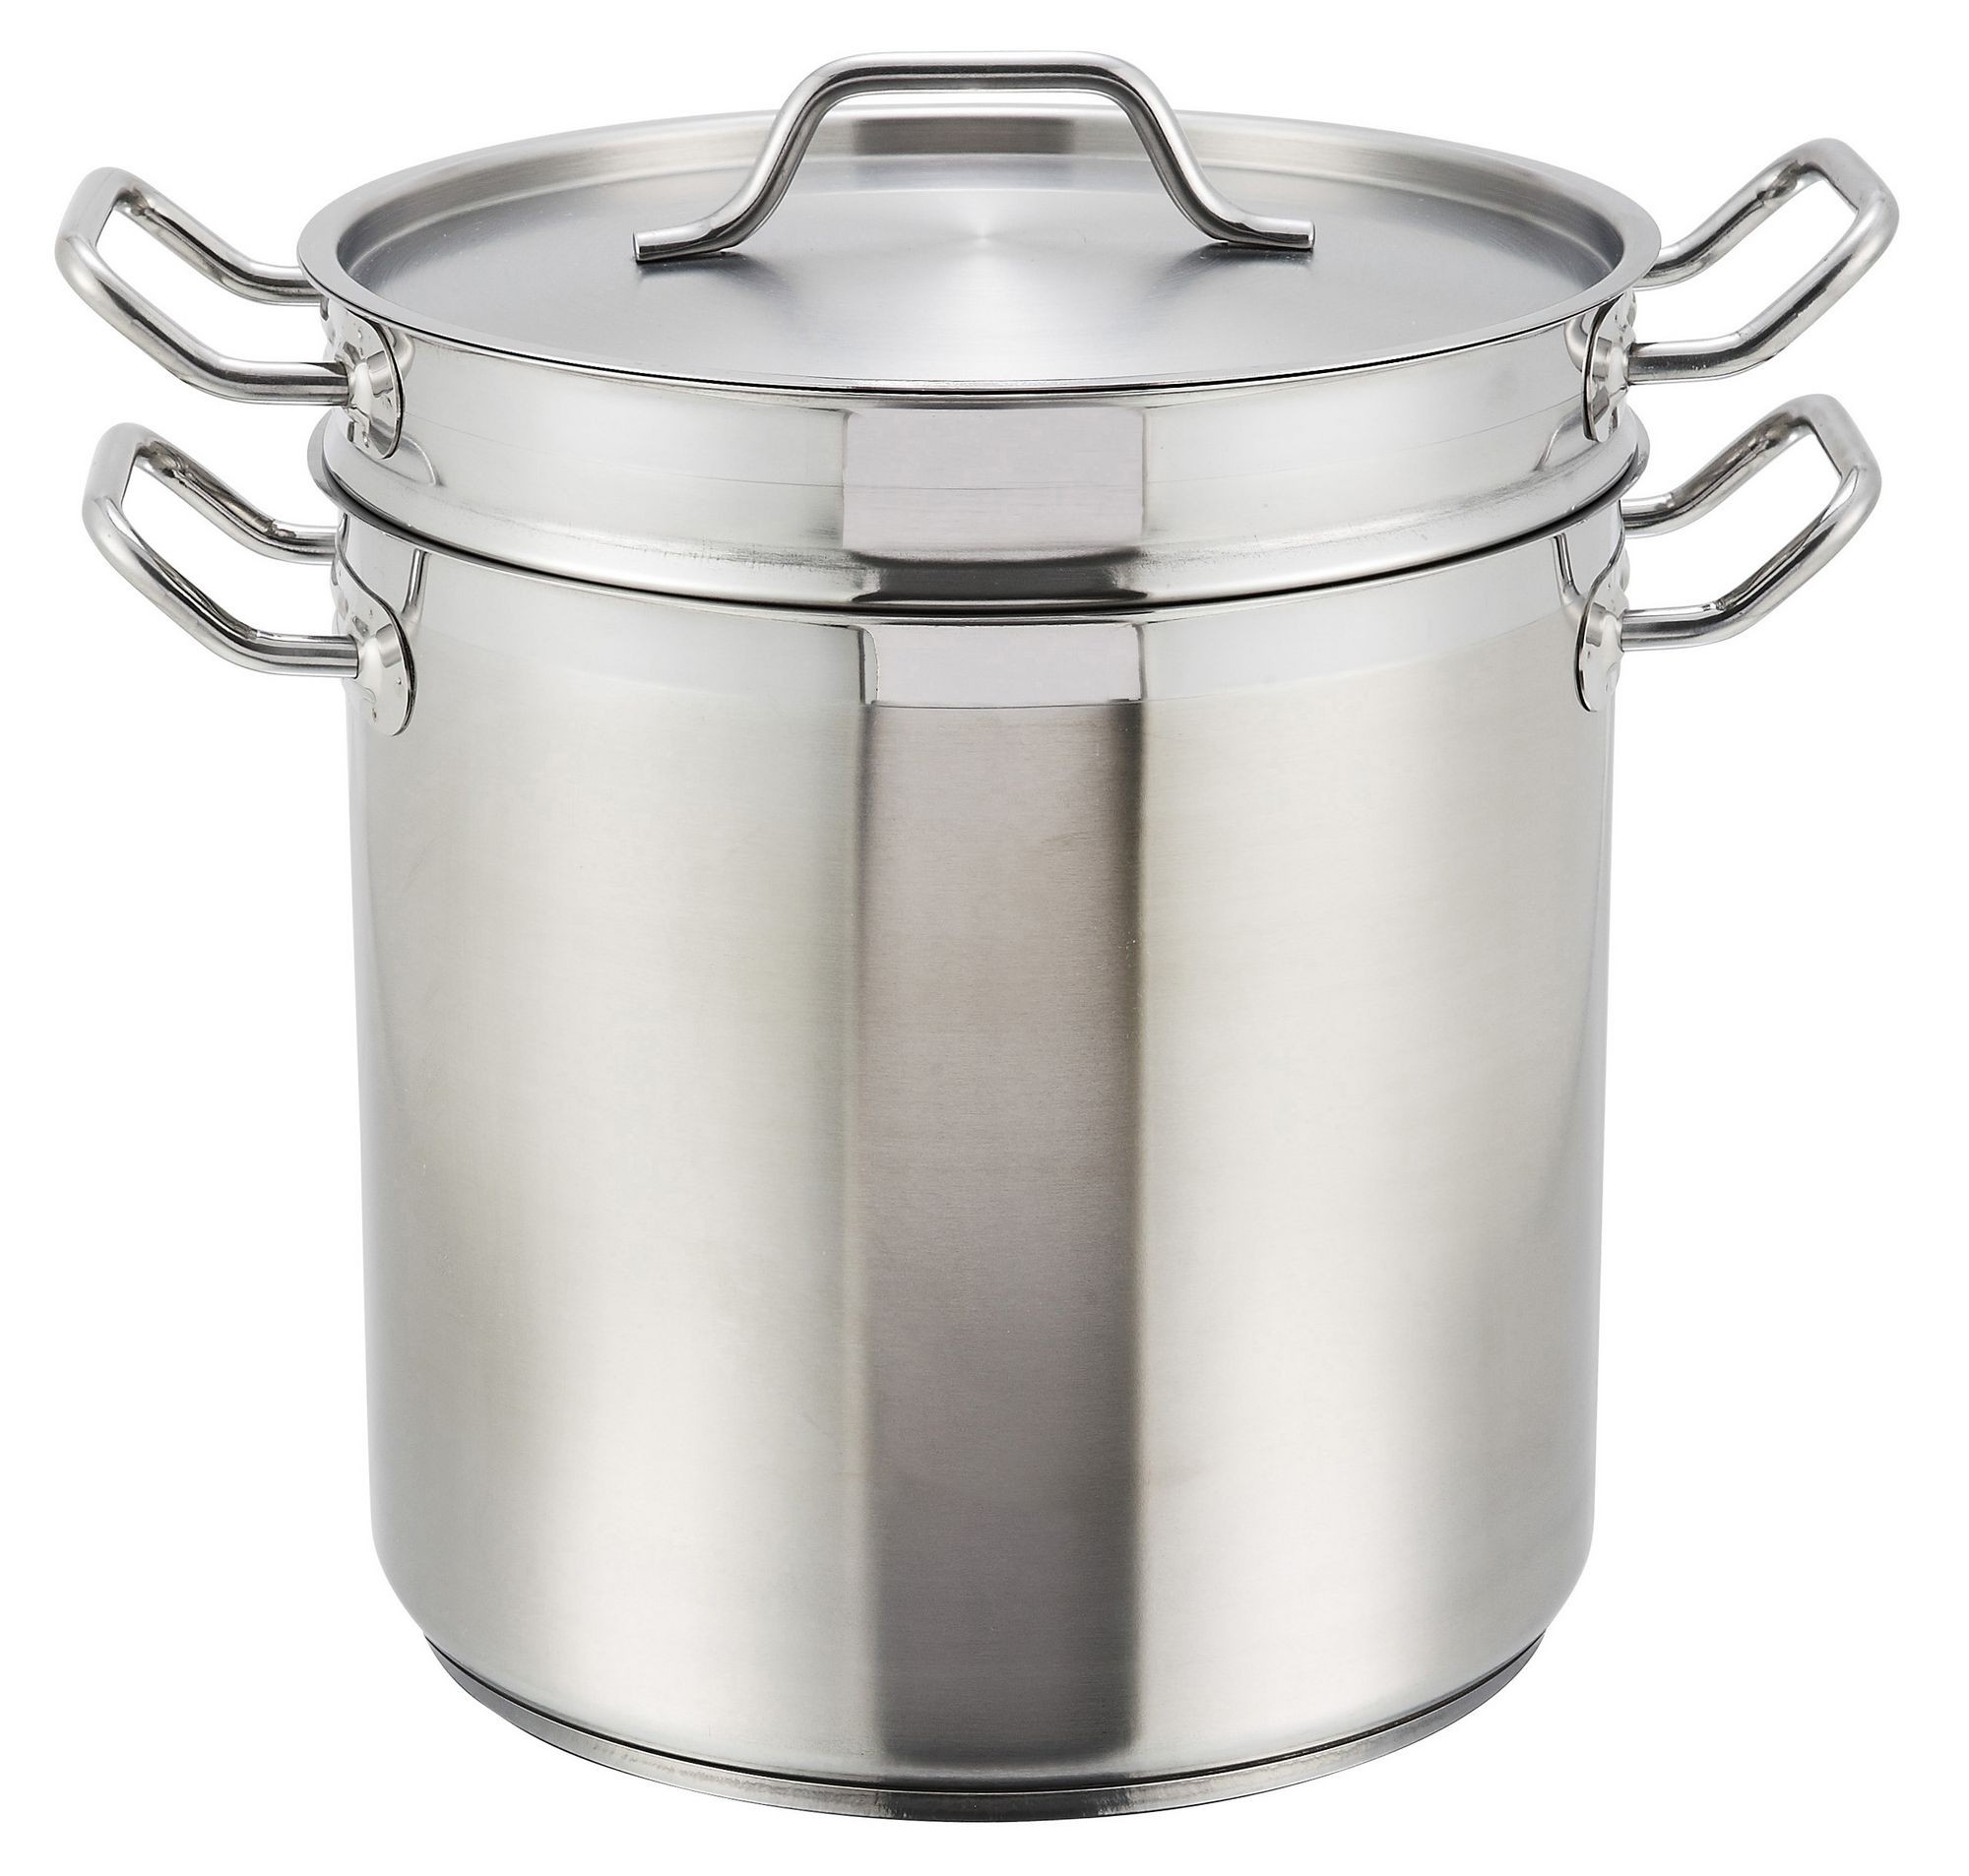 Winco SSDB-16 Stainless Steel 16 Qt. Double Boiler with Cover